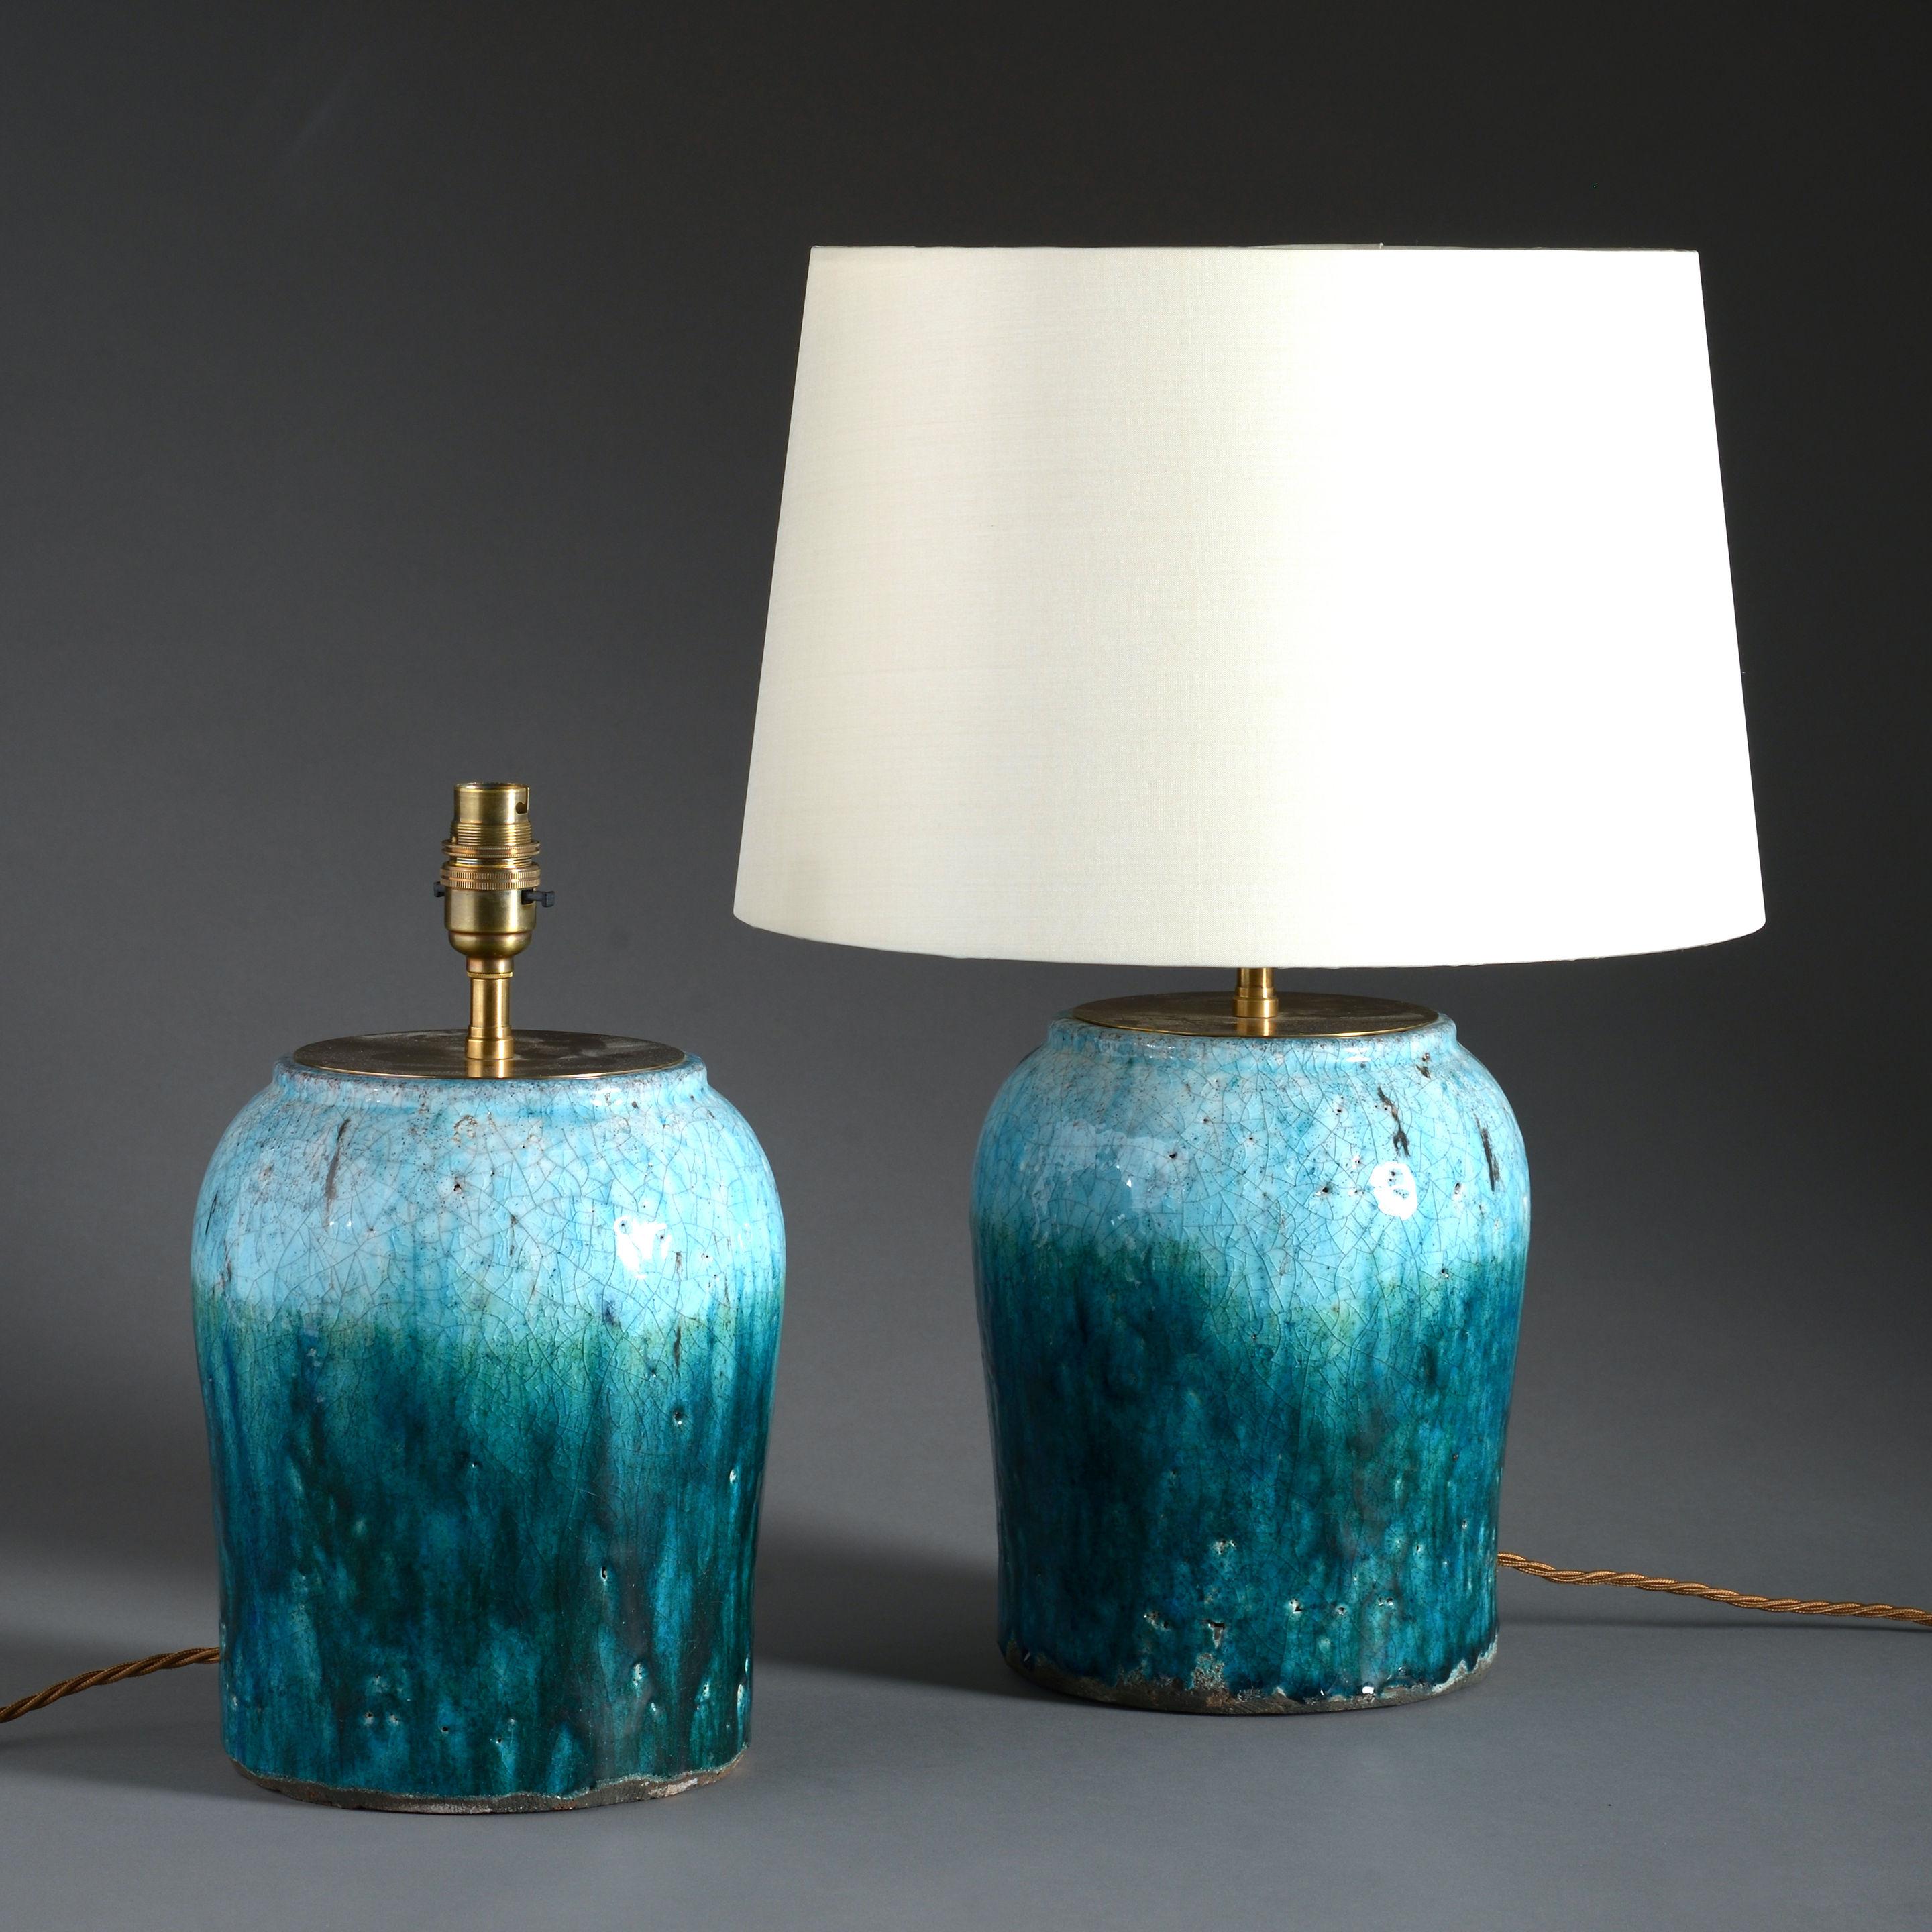 French Pair of Turquoise Crackle Glaze Pottery Vases as Lamps